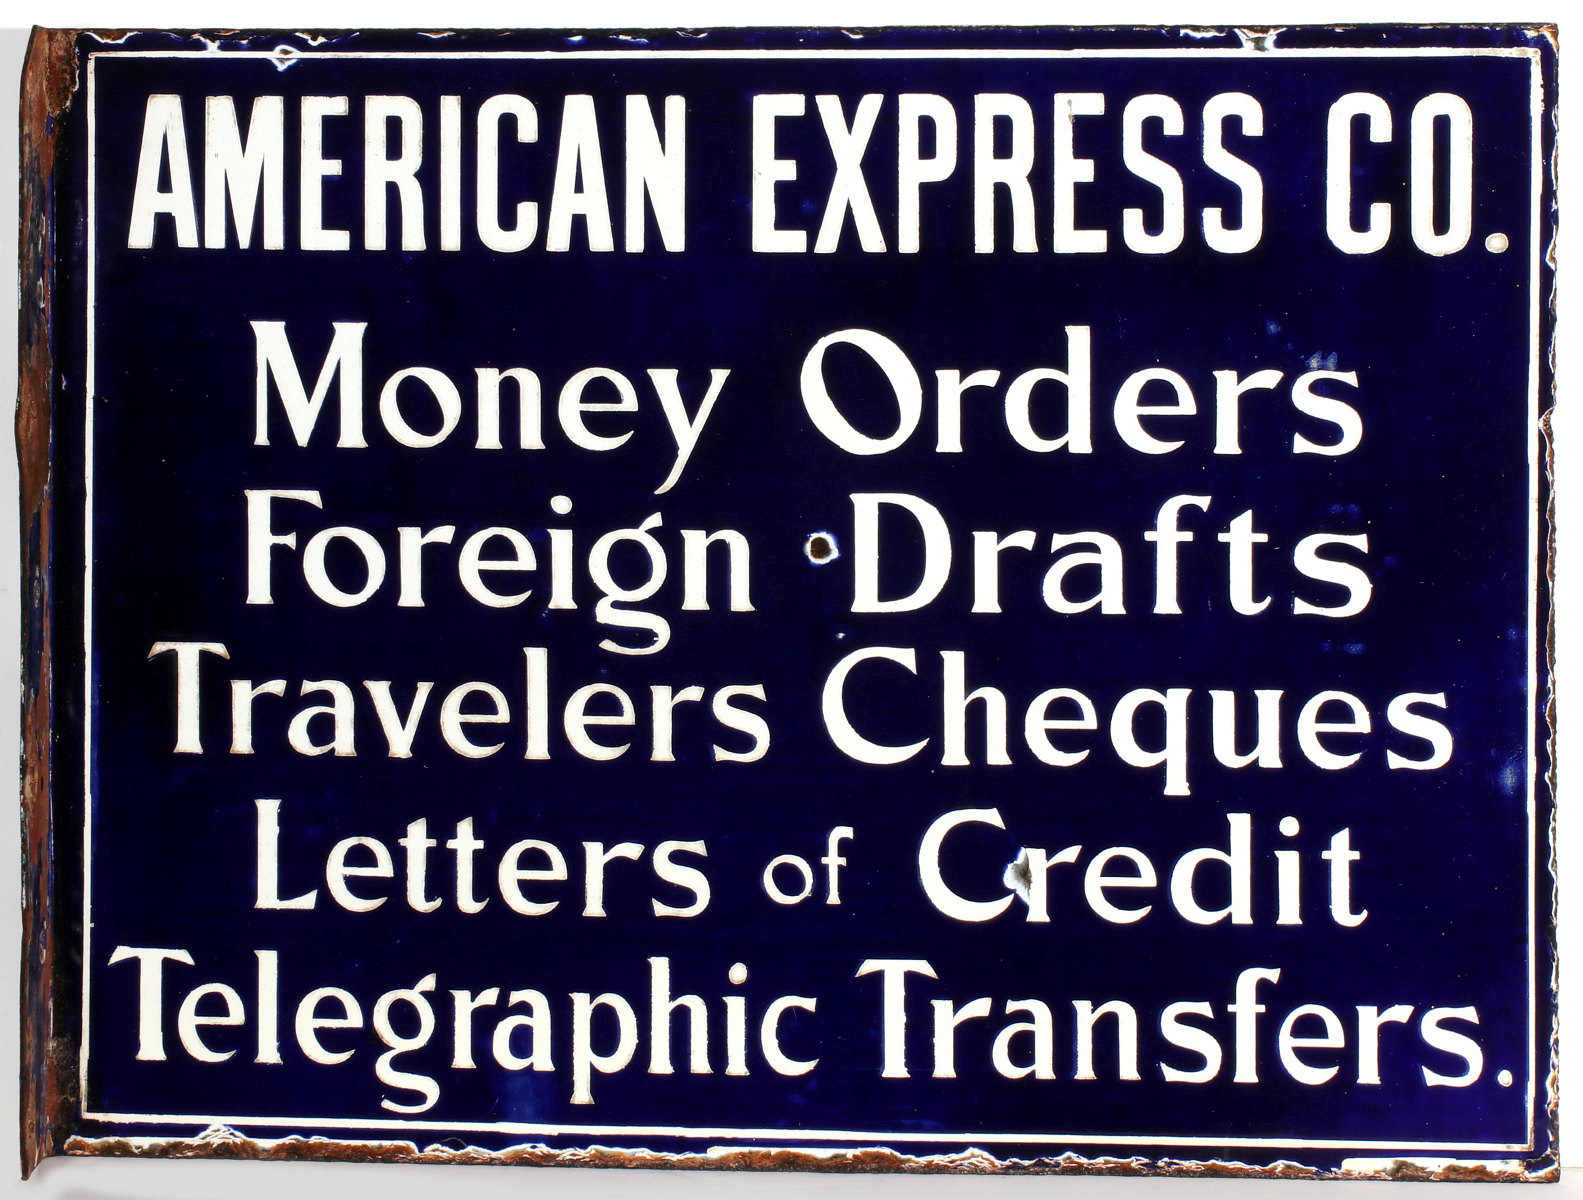 AMERICAN EXPRESS TRAVELERS CHEQUES, FOREIGN DRAFTS SIGN